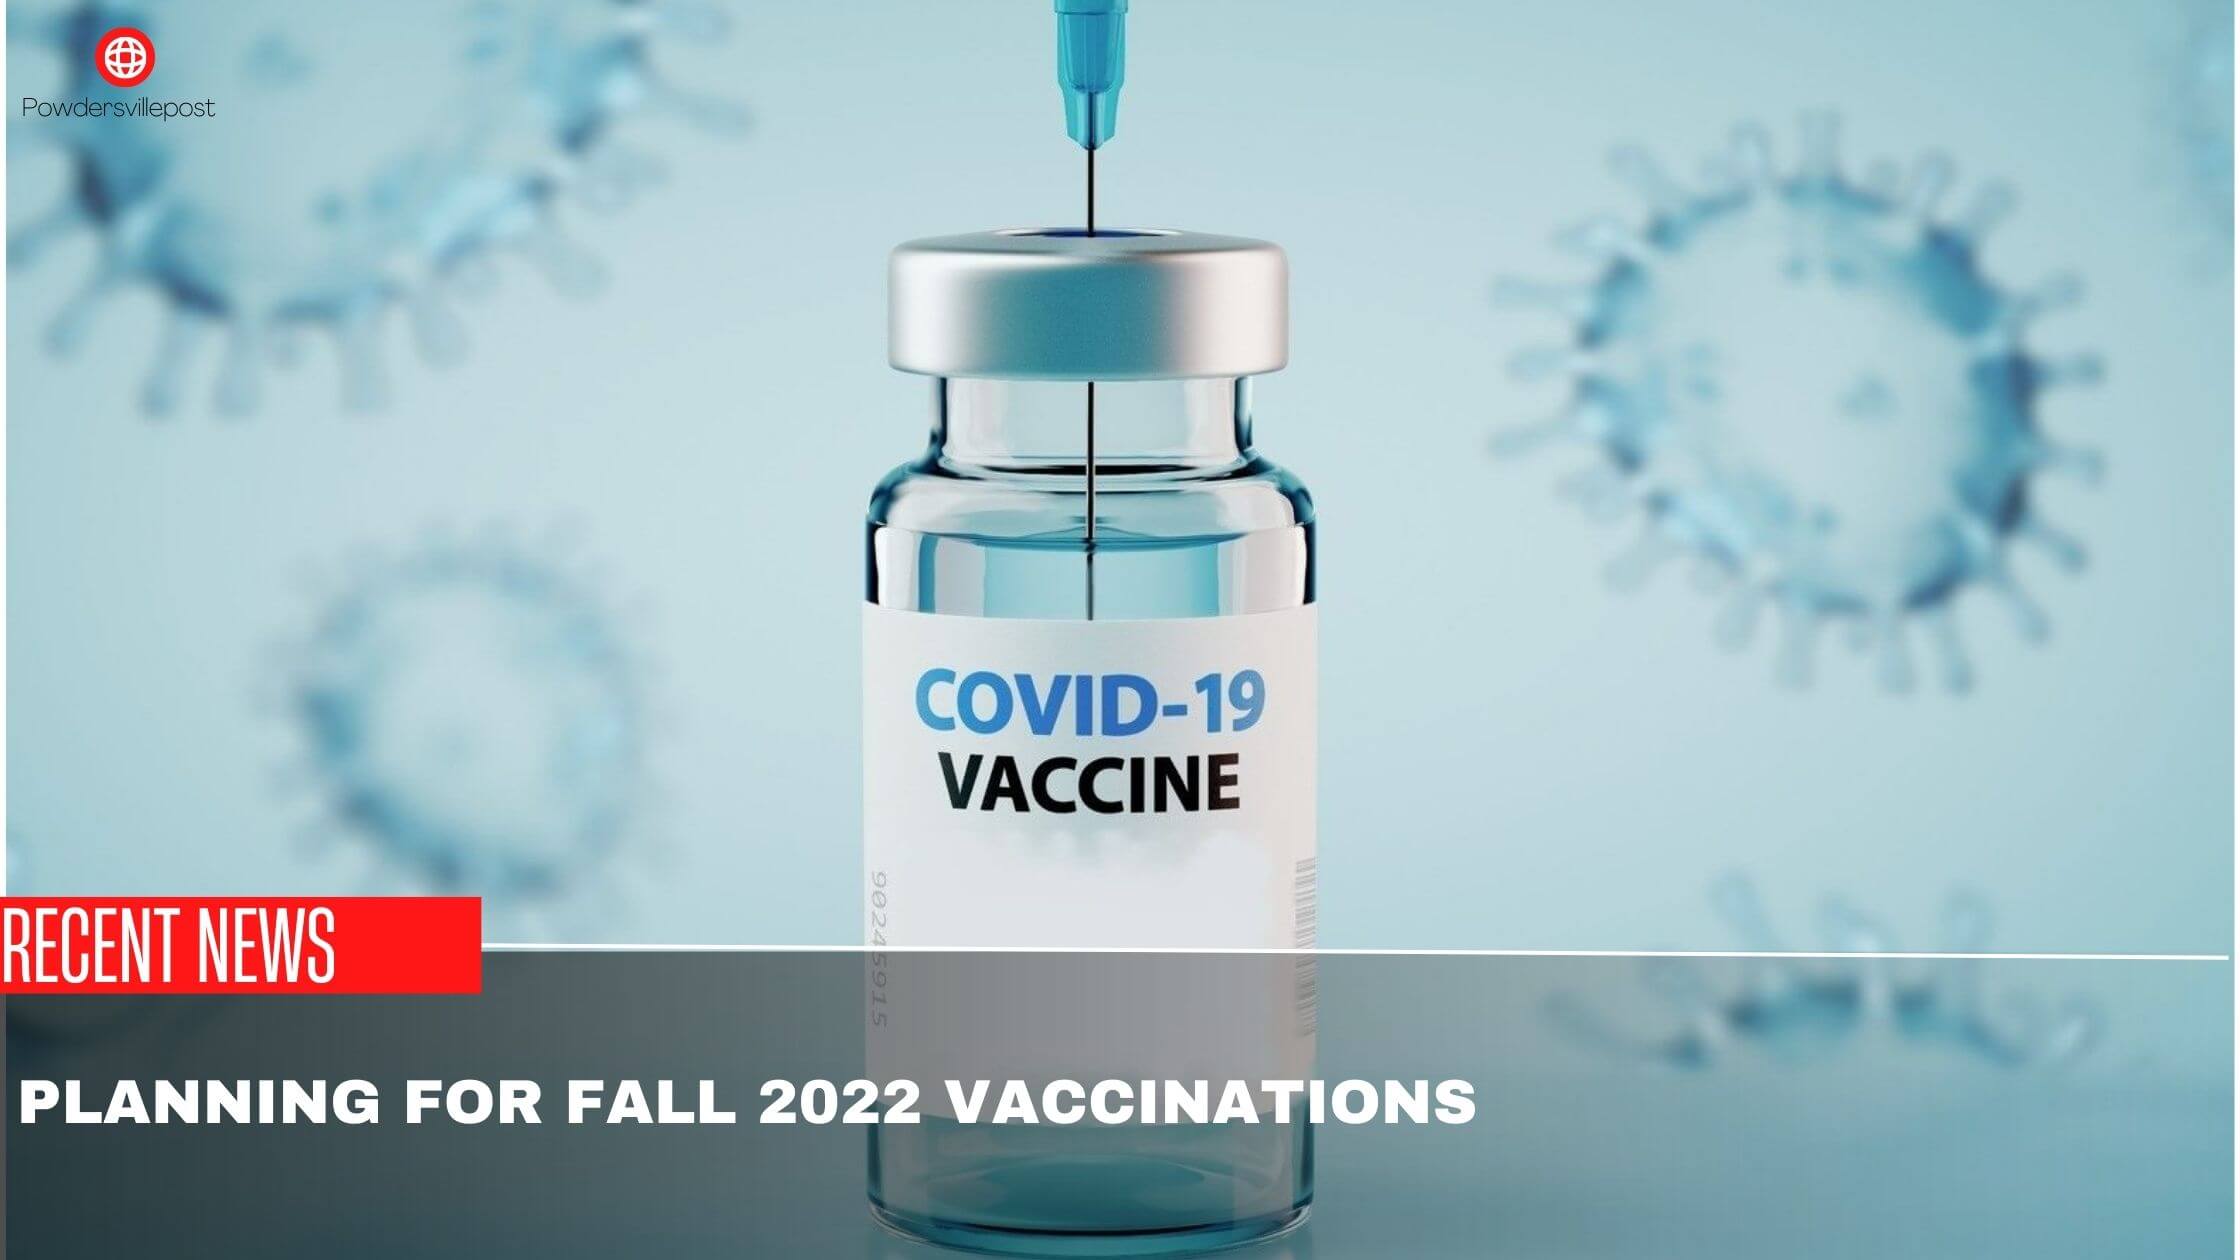 Planning for Fall 2022 vaccinations